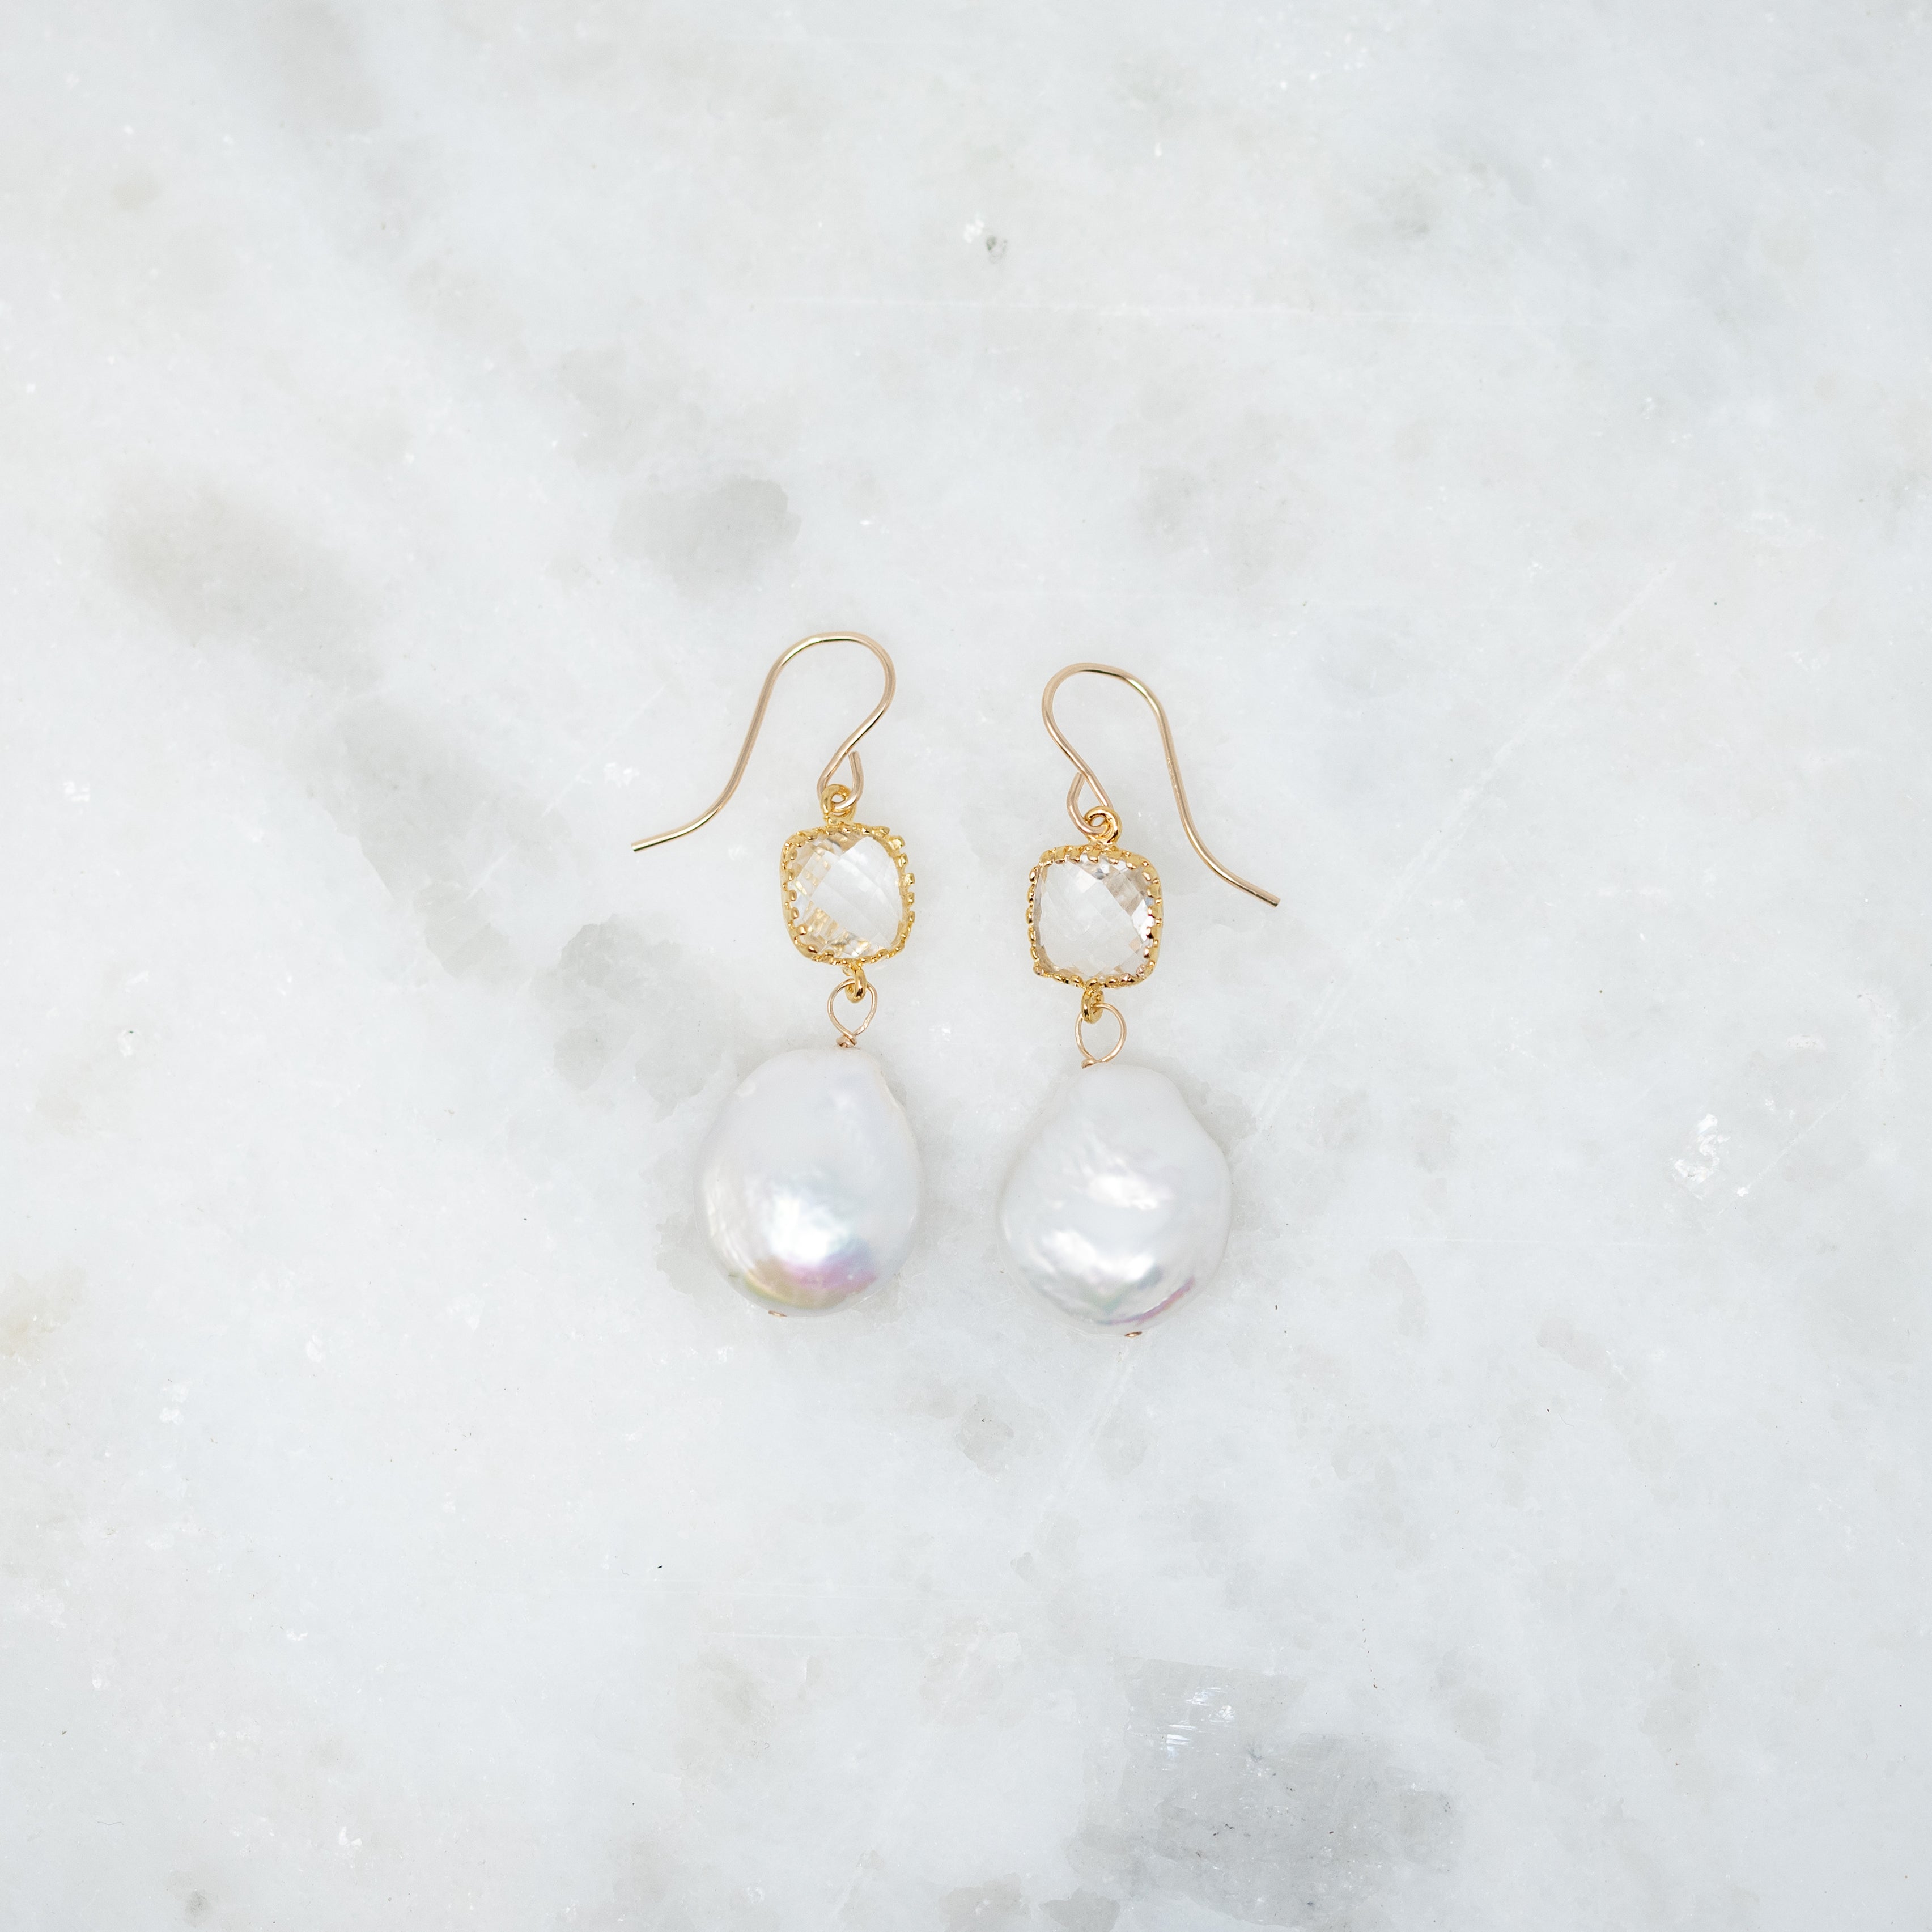 A pair of earrings with crystals wrapped in gold. There is a dime sized pearl hanging from the bottom. 